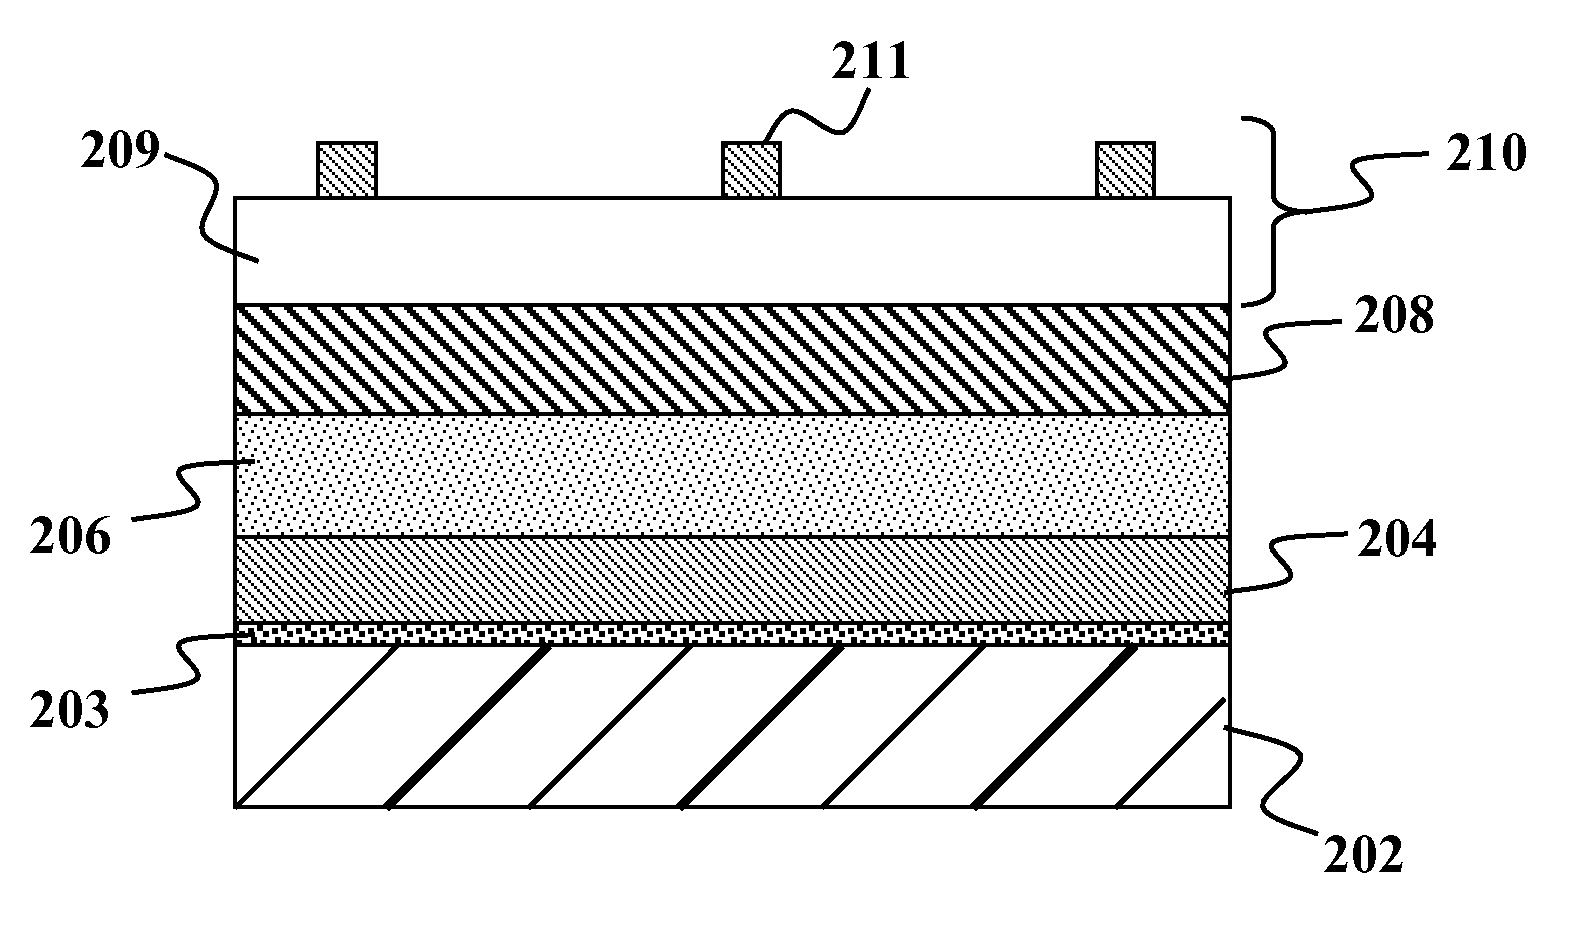 Solution-based fabrication of photovoltaic cell